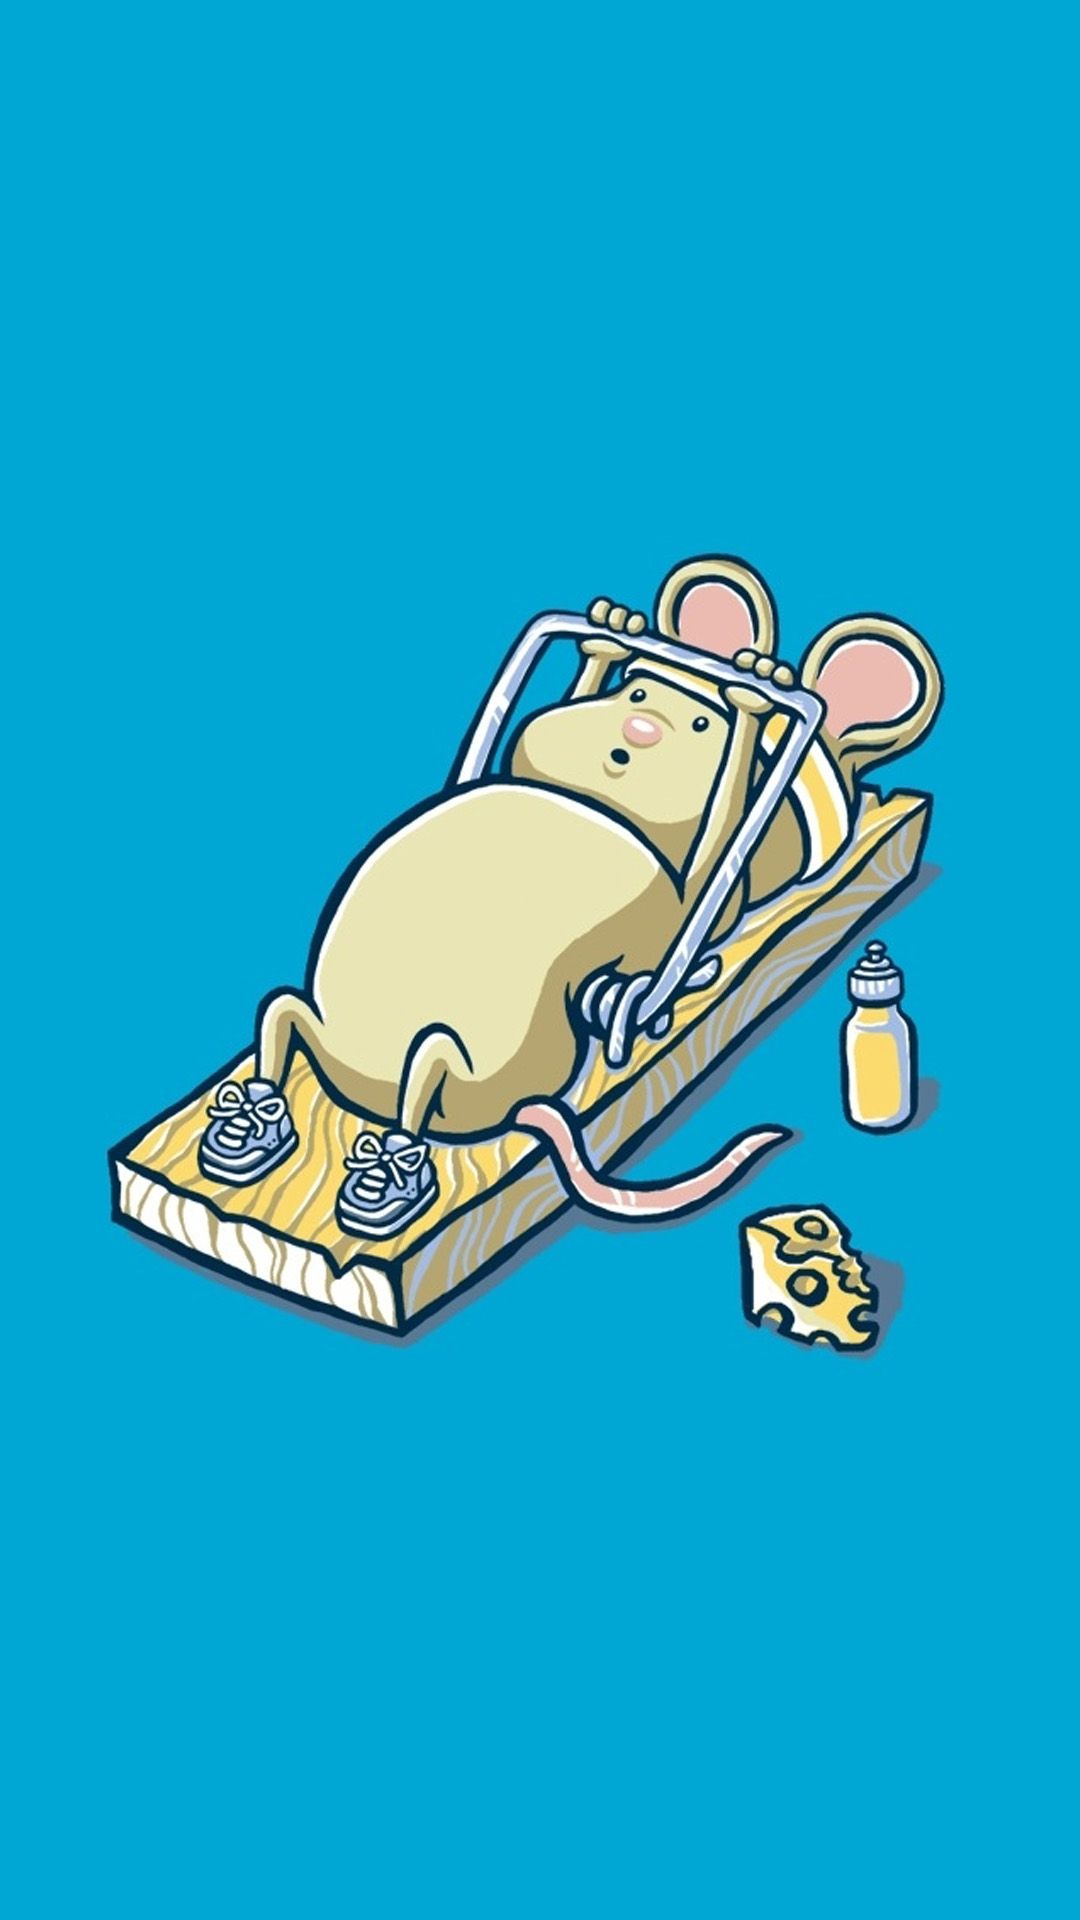 Rat on Gym to see more #Cute and #Funny #Cartoon #Wallpaper - Gym wallpaper, Cartoon wallpaper, Cute love cartoons